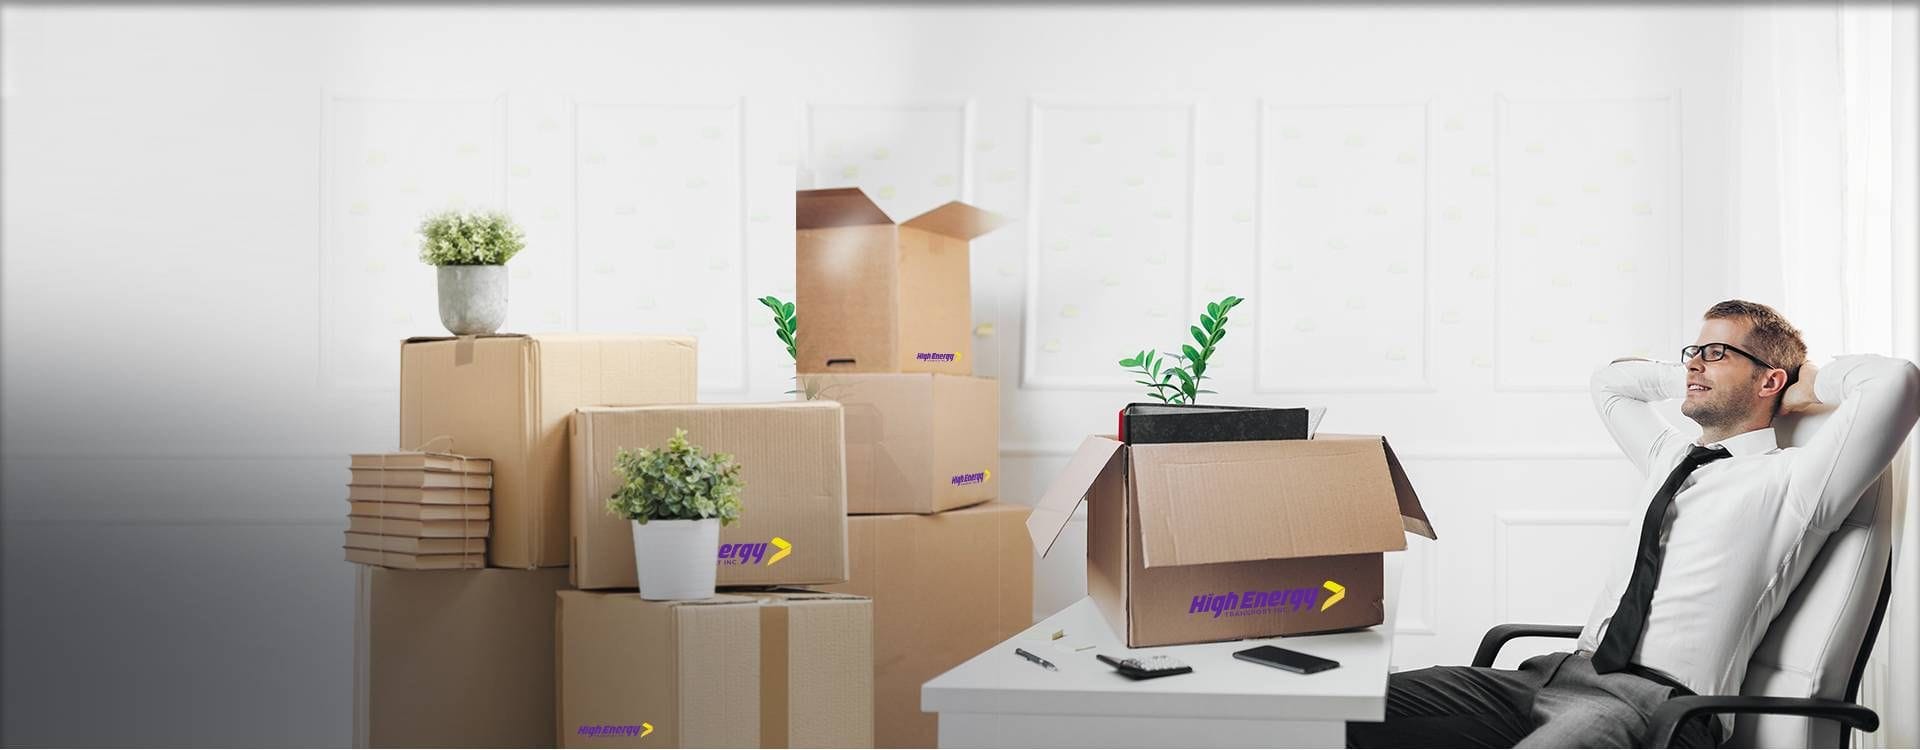 What To Think About When Considering An Office Move